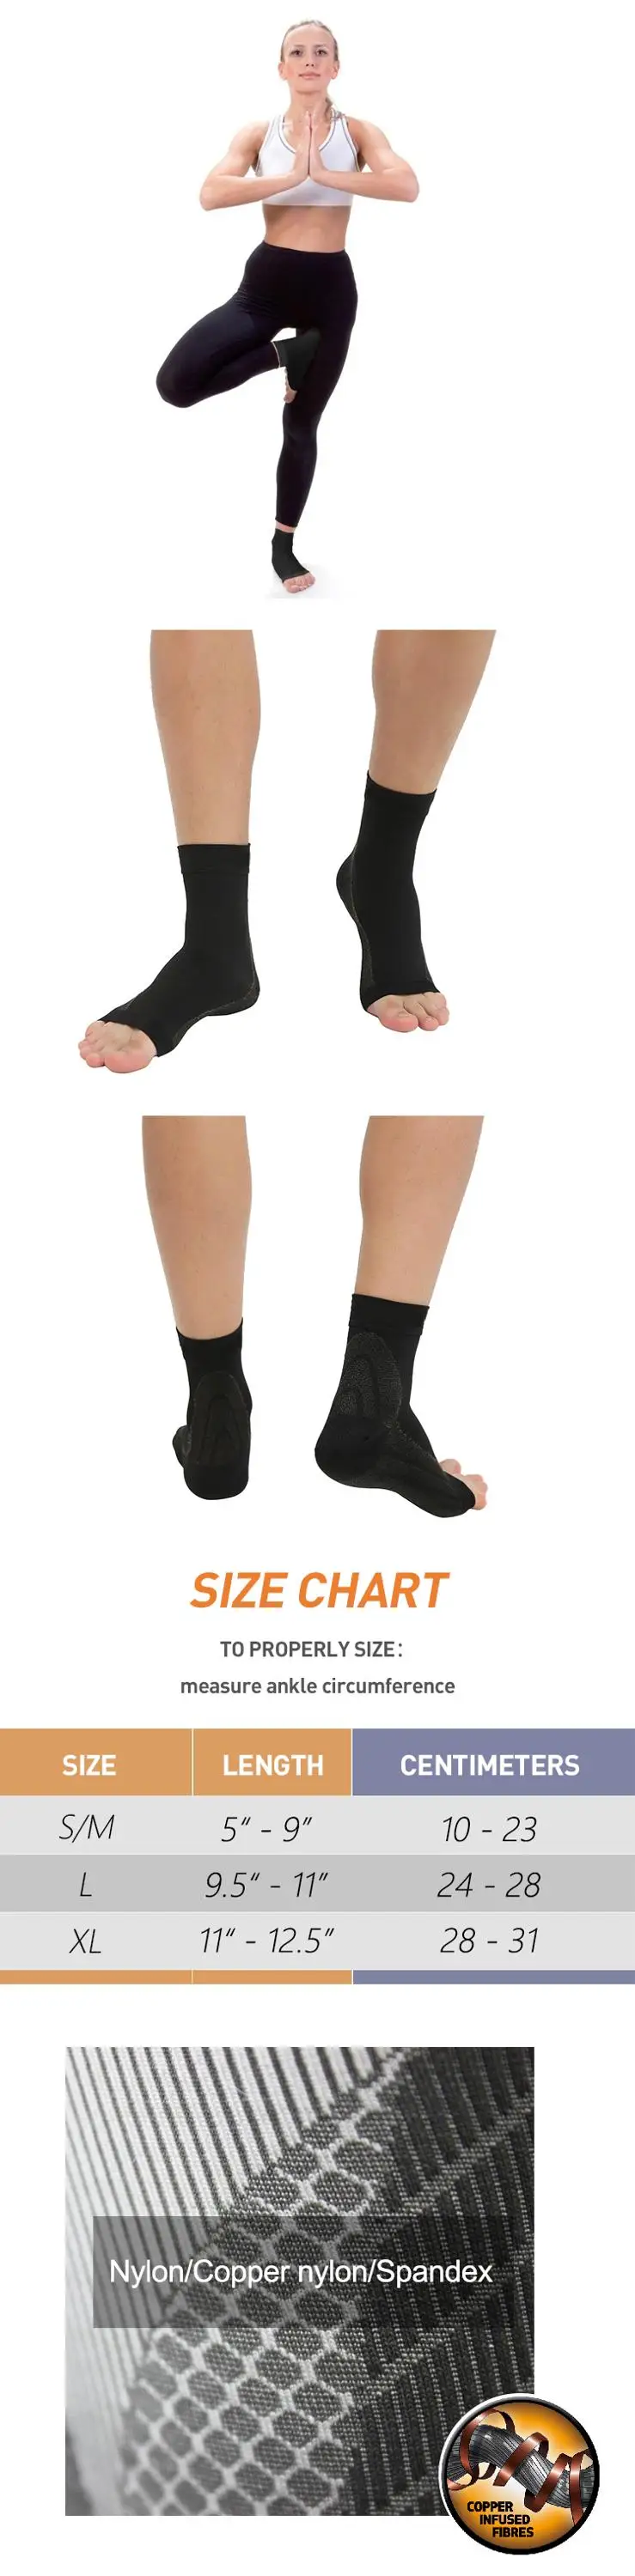 Compression Ankle Sleeve Lightweight Ankle Brace Copper ankle support for sports